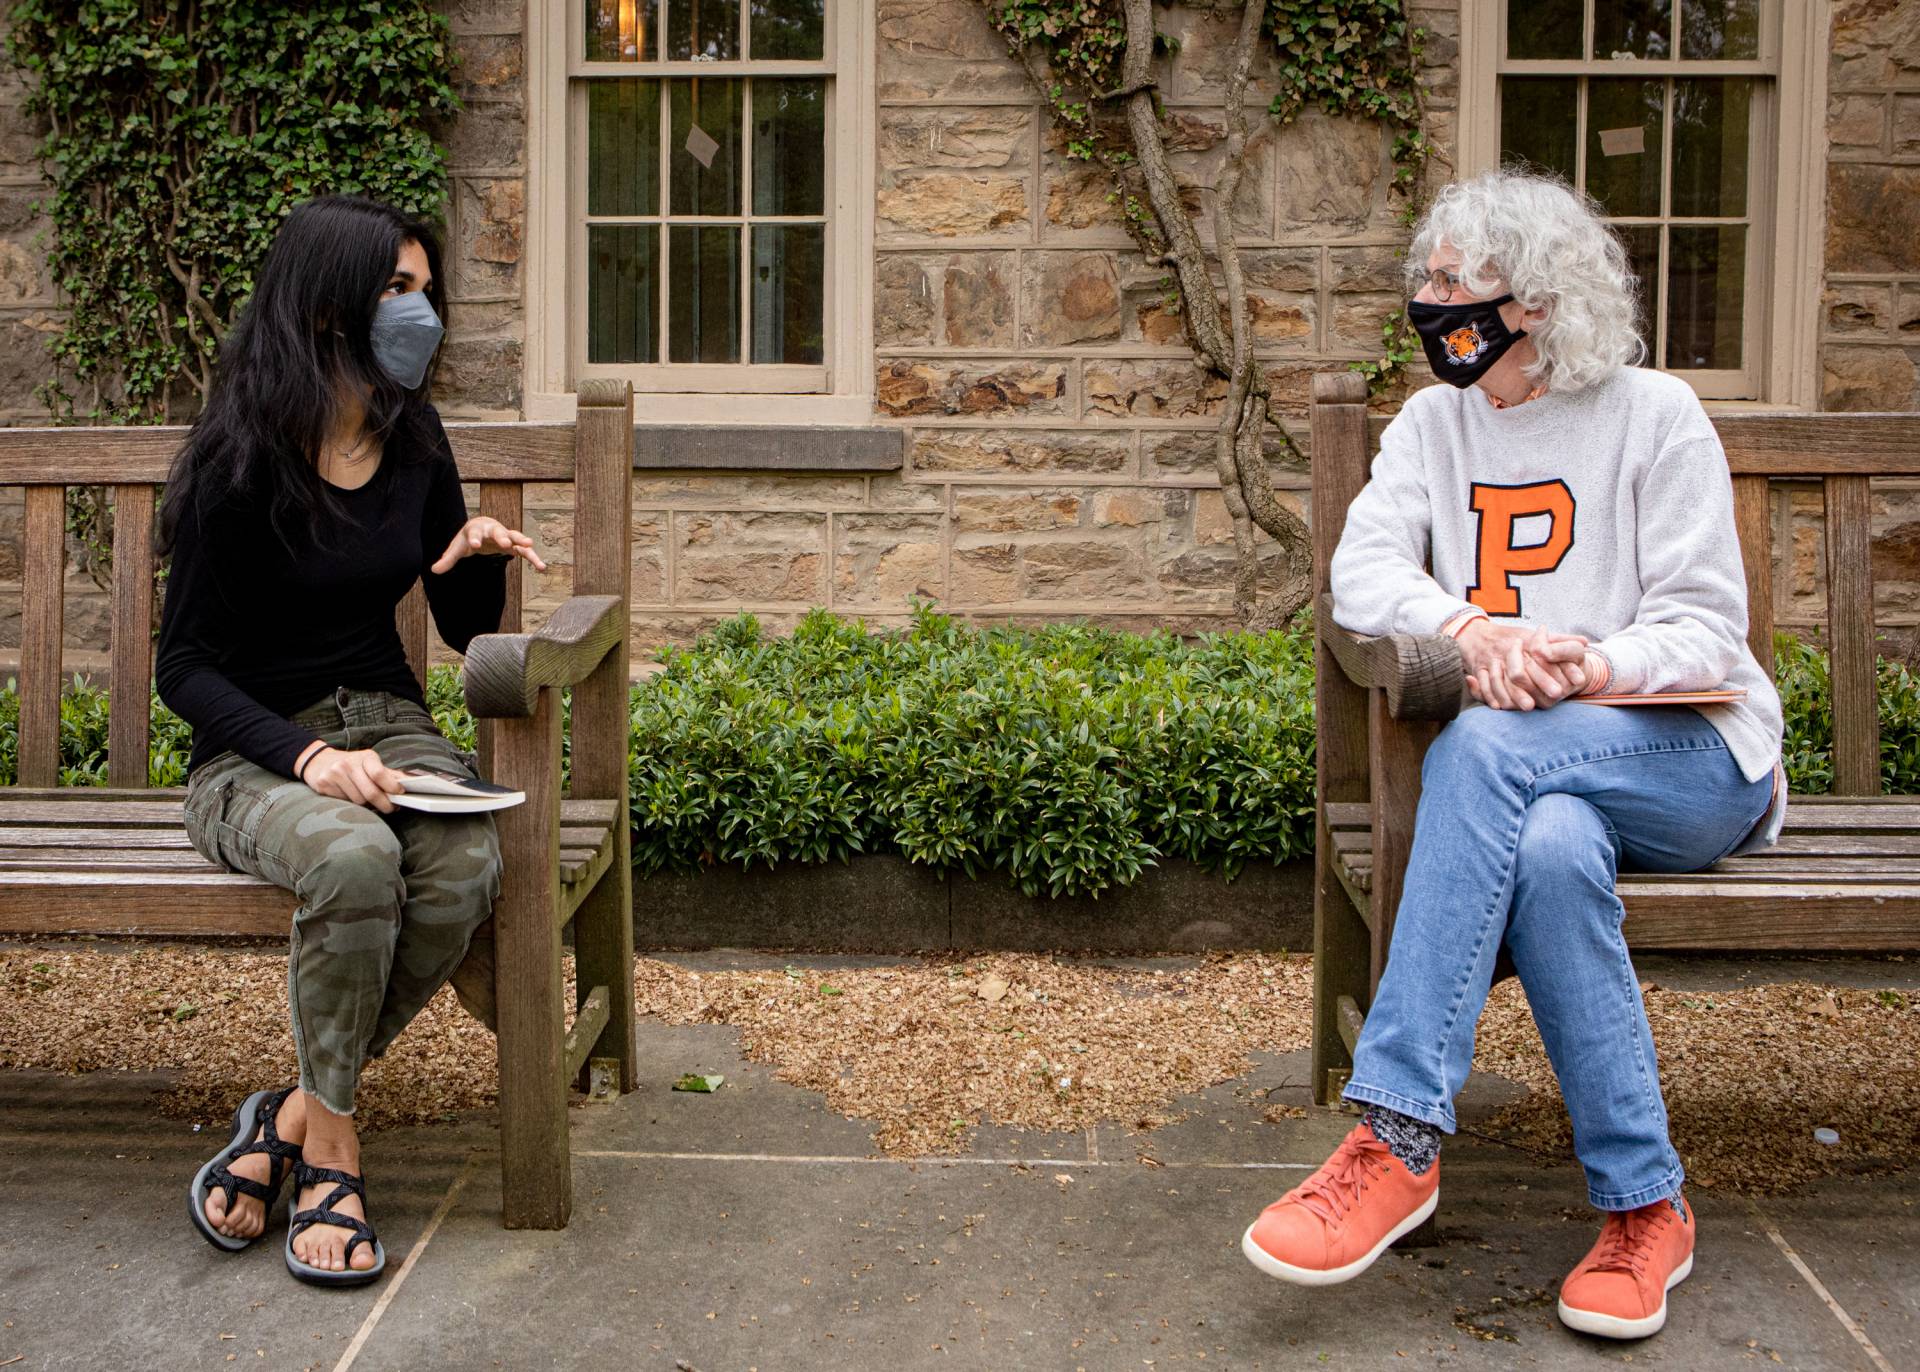 Student and Jill Dolan chat while sitting on benches